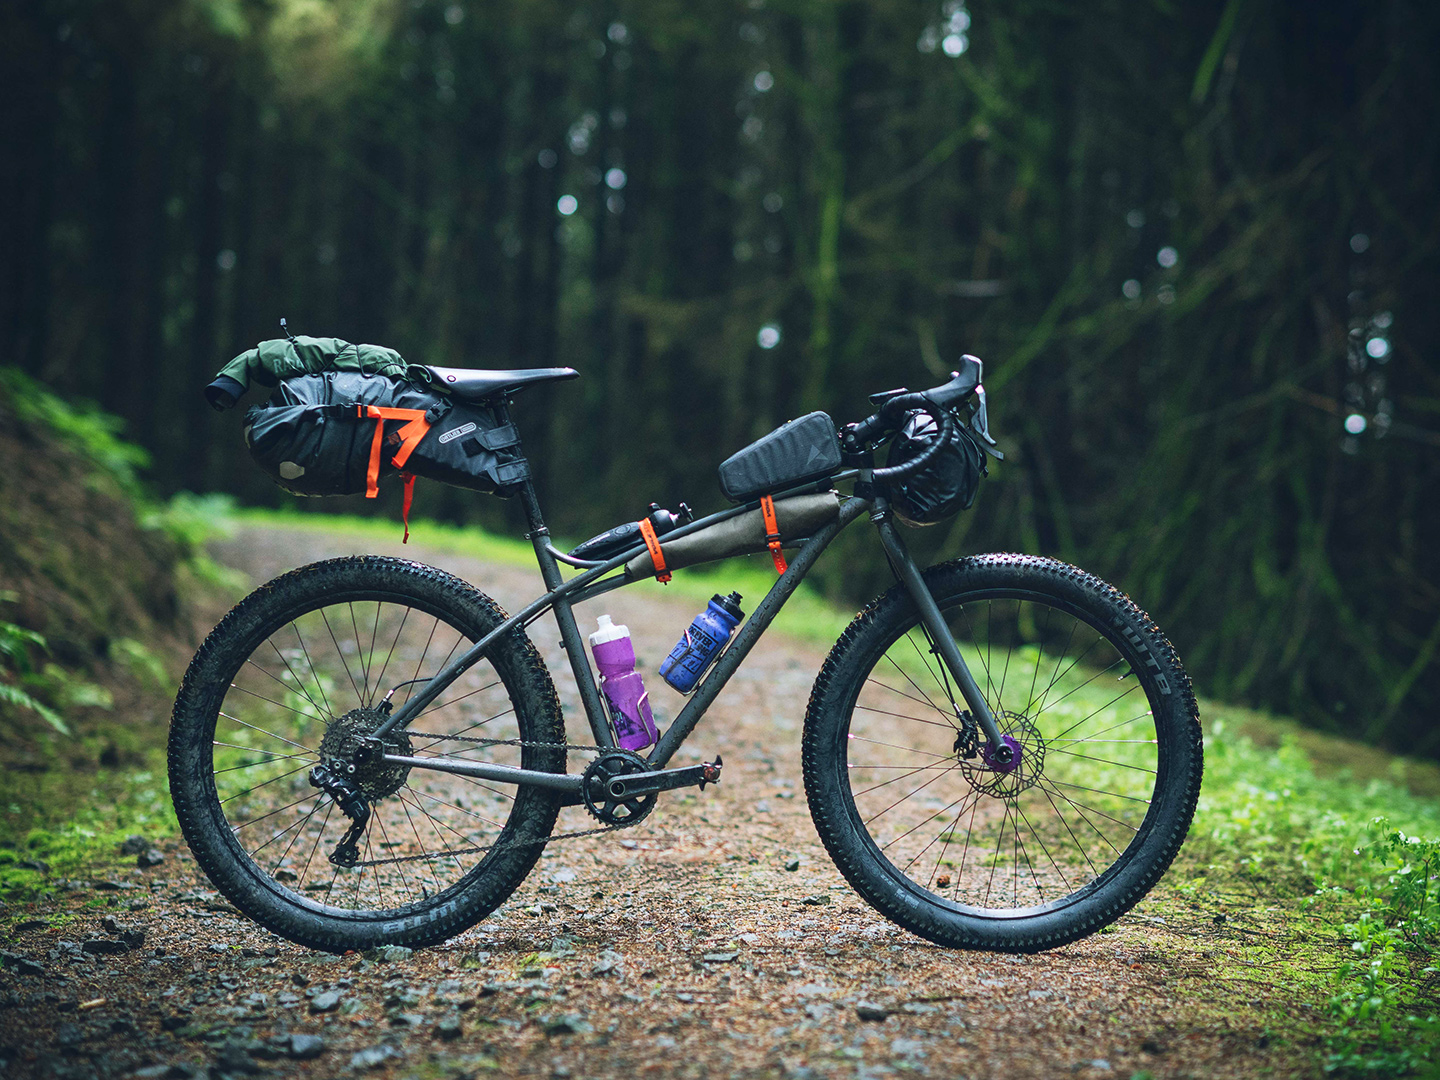 Bikepacking bike posed across a trail with full load for adventure secured in a saddle bag and top tube bag.